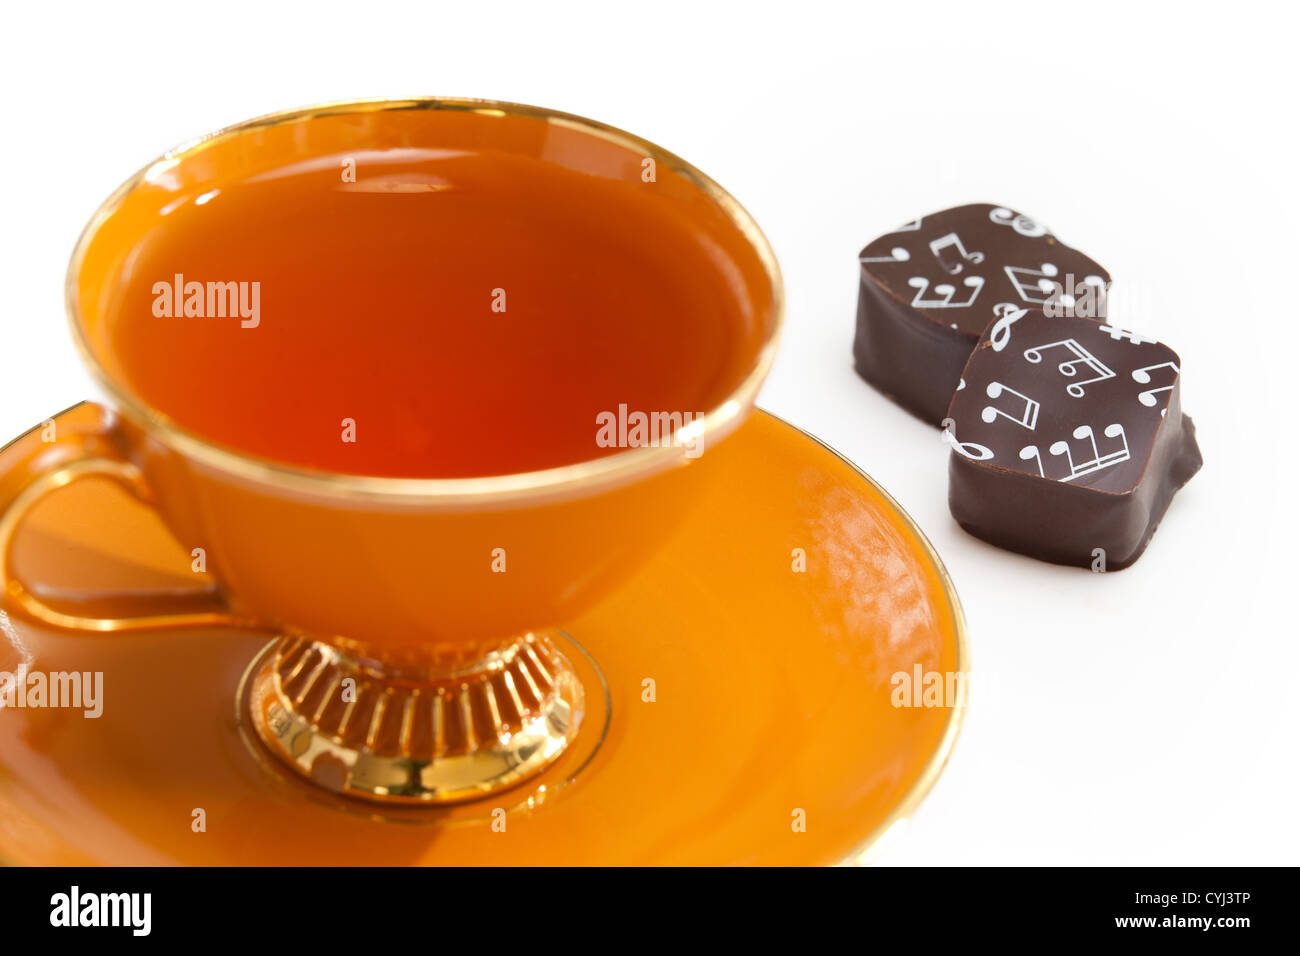 orange tea cup at tea party with musical note chocolate with notes printed on them. Stock Photo